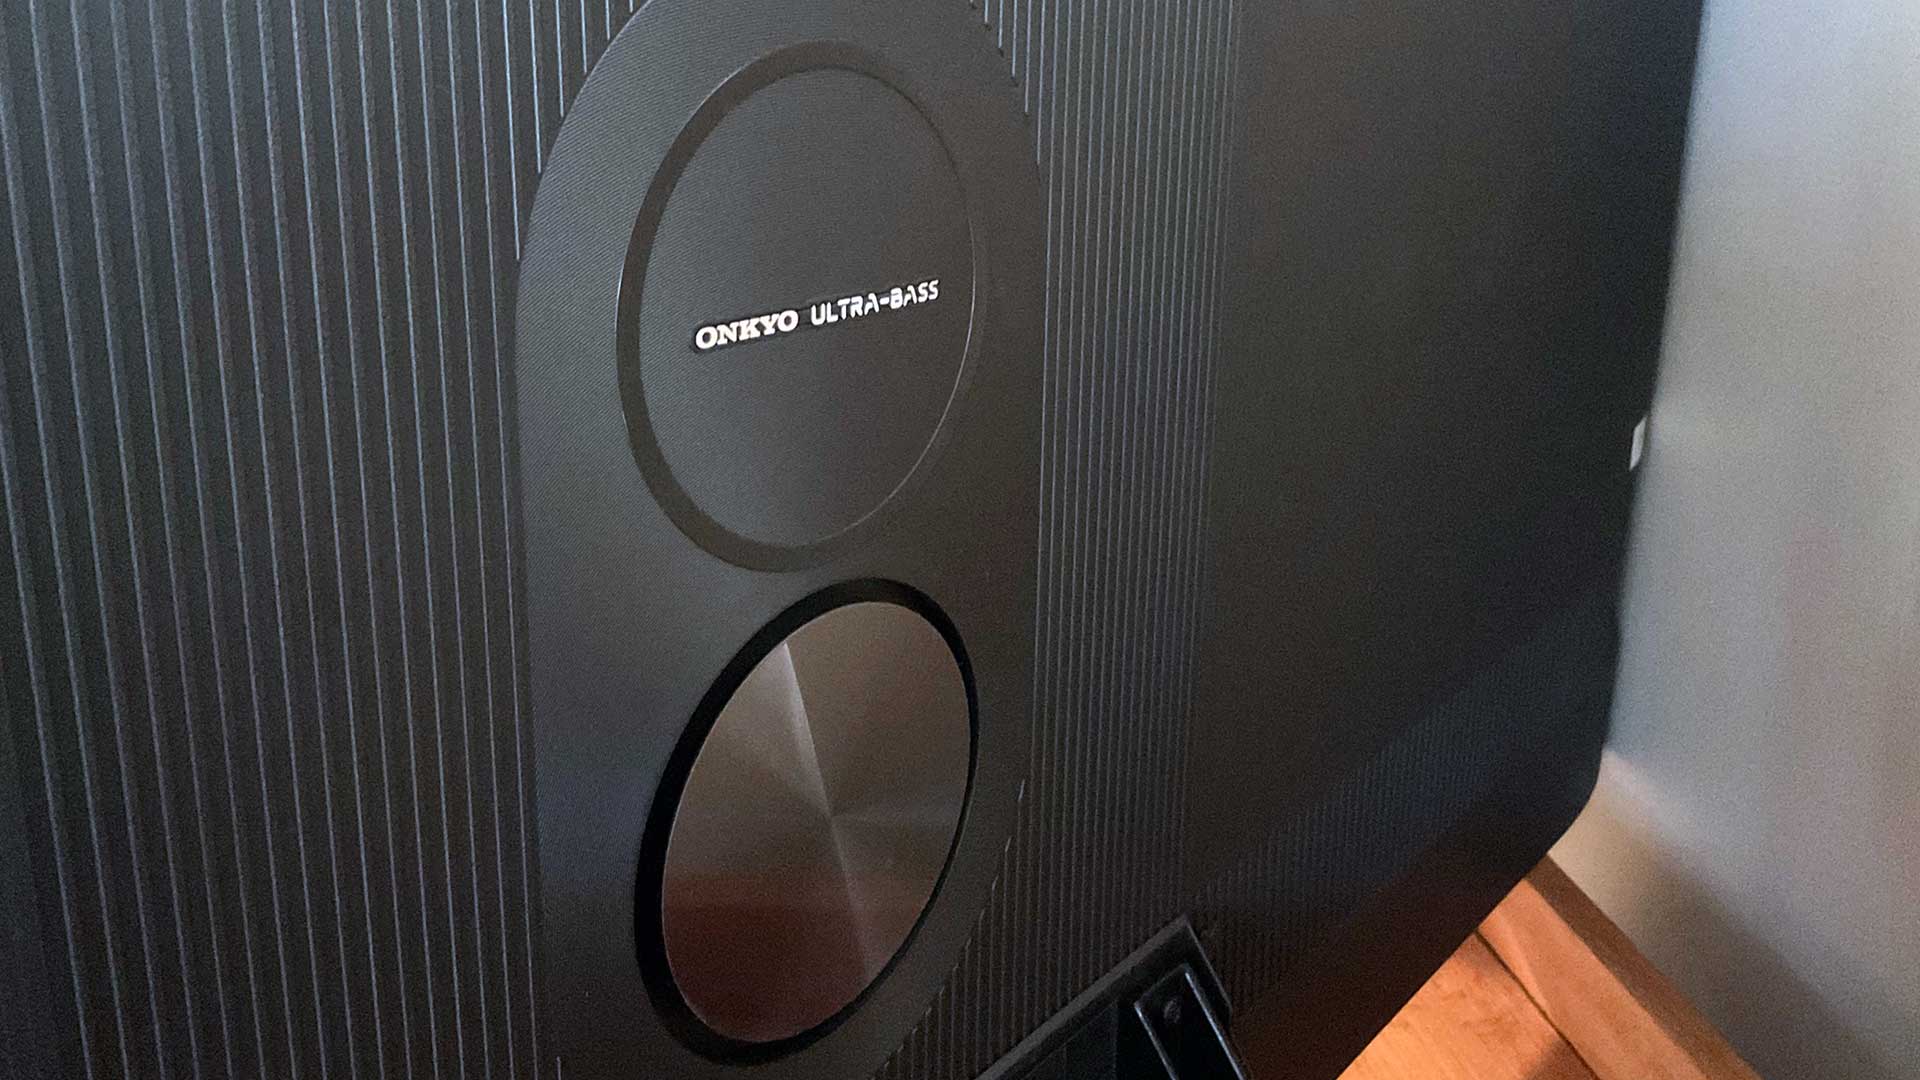 The Onkyo-branded 'subwoofer' on the back of the TCL C835